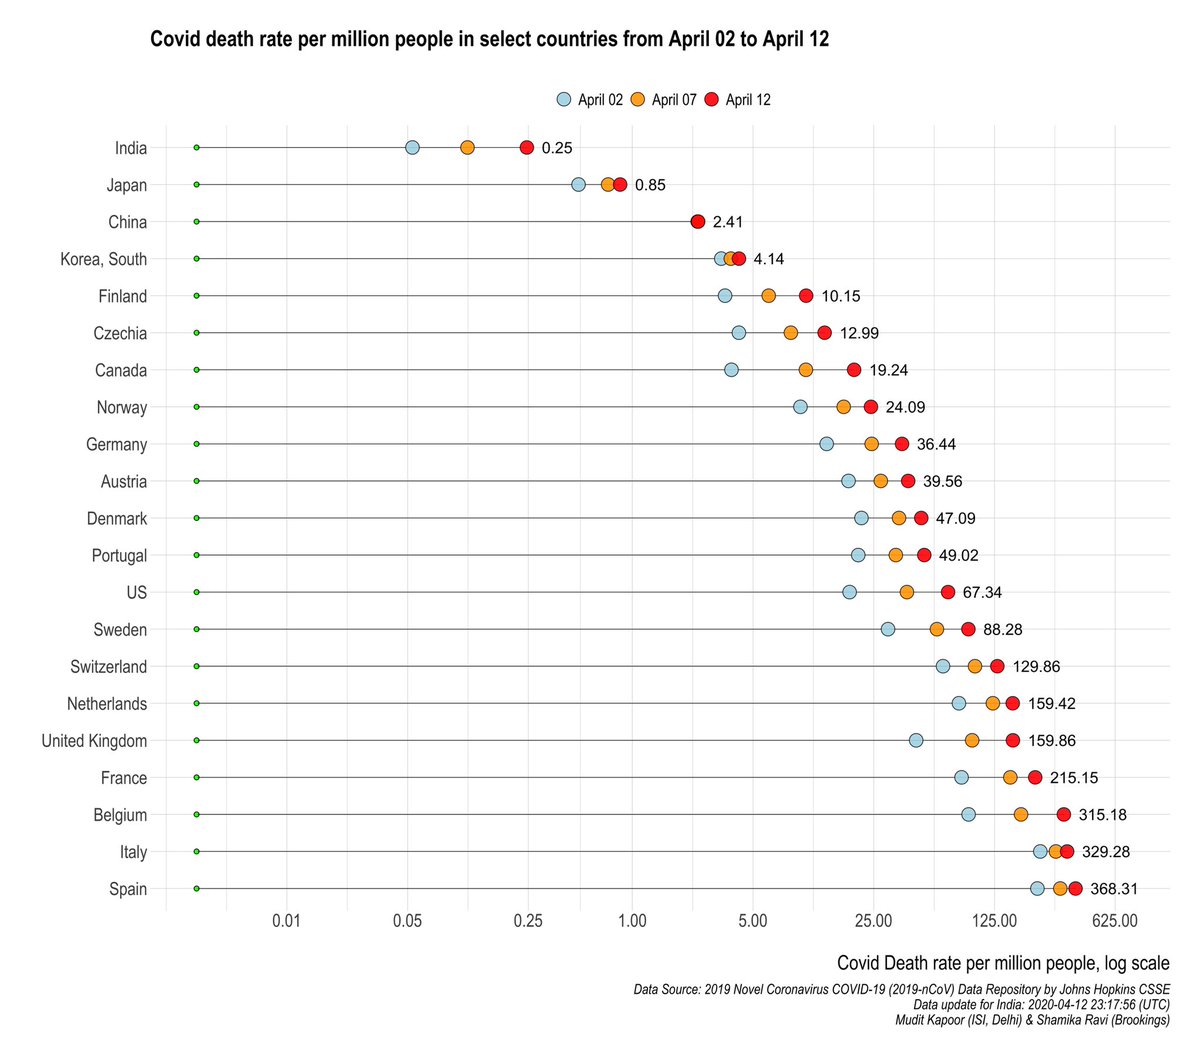 COVID death rates per million:1) Low but rising in India.2) Low and slowing in Japan & S Korea3) High and slowing in Italy & Spain 4) High but not falling in Belgium & UK